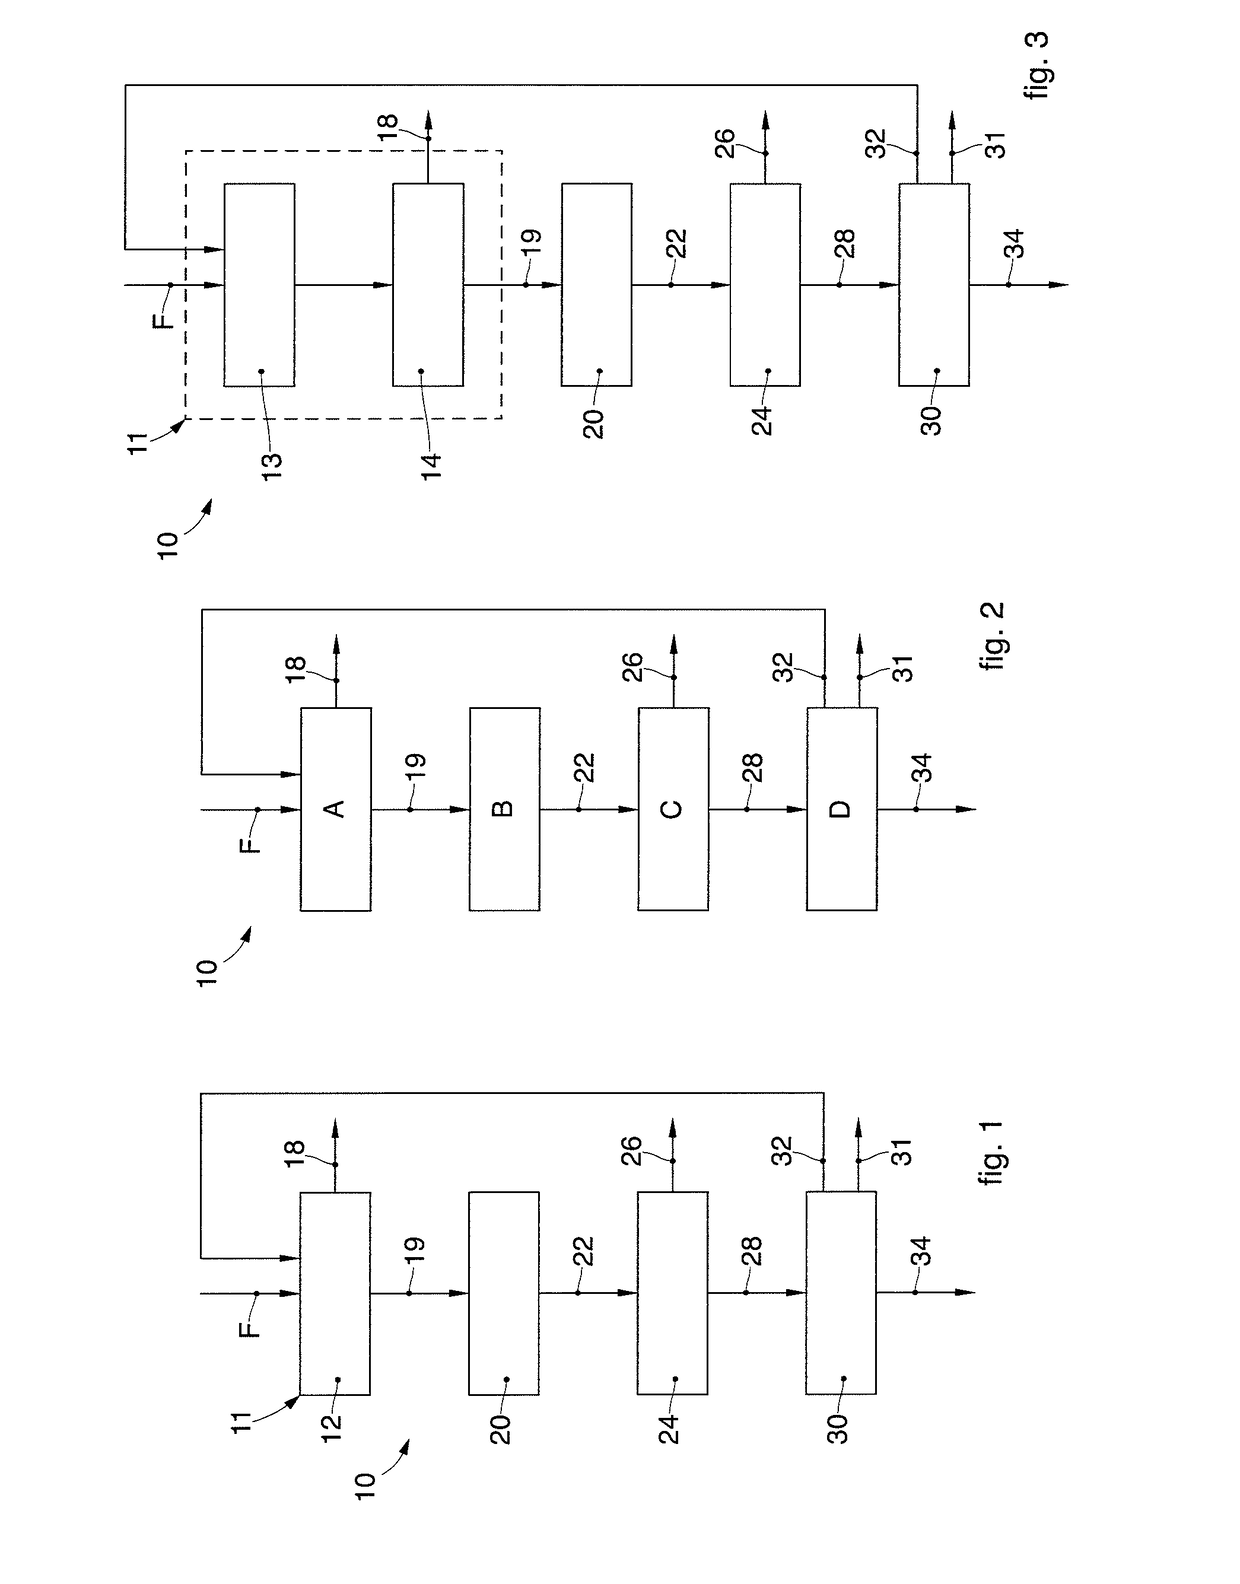 Plant and method for treatment of poultry manure